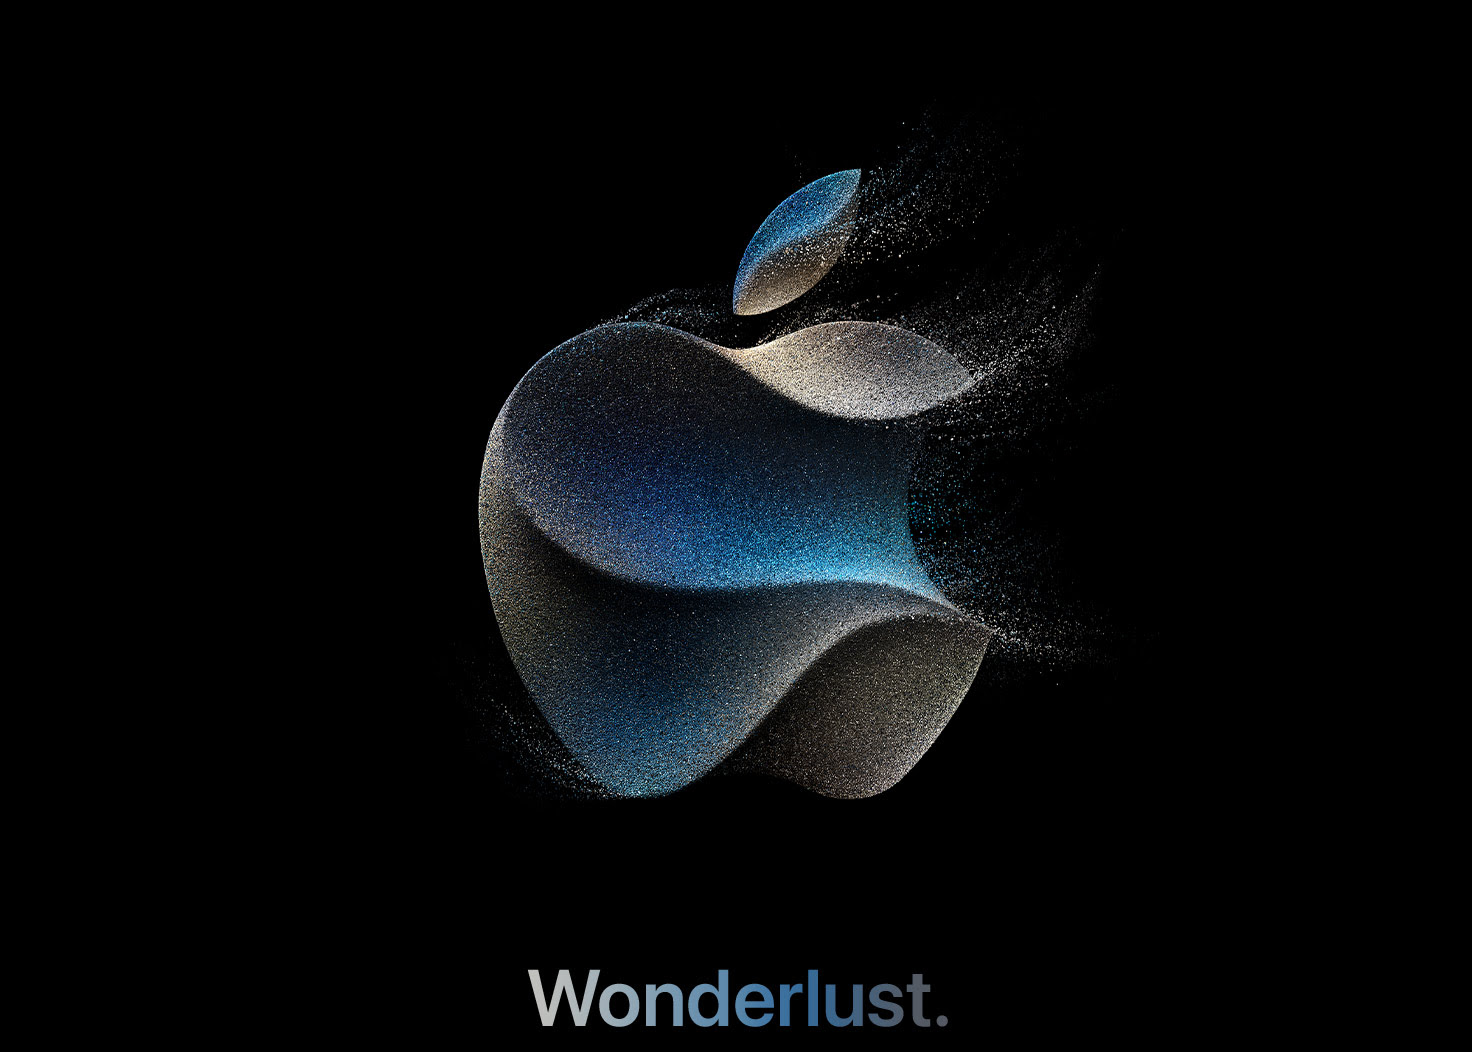 Apple’s ‘Wonderlust’ event: What to expect on september 12th